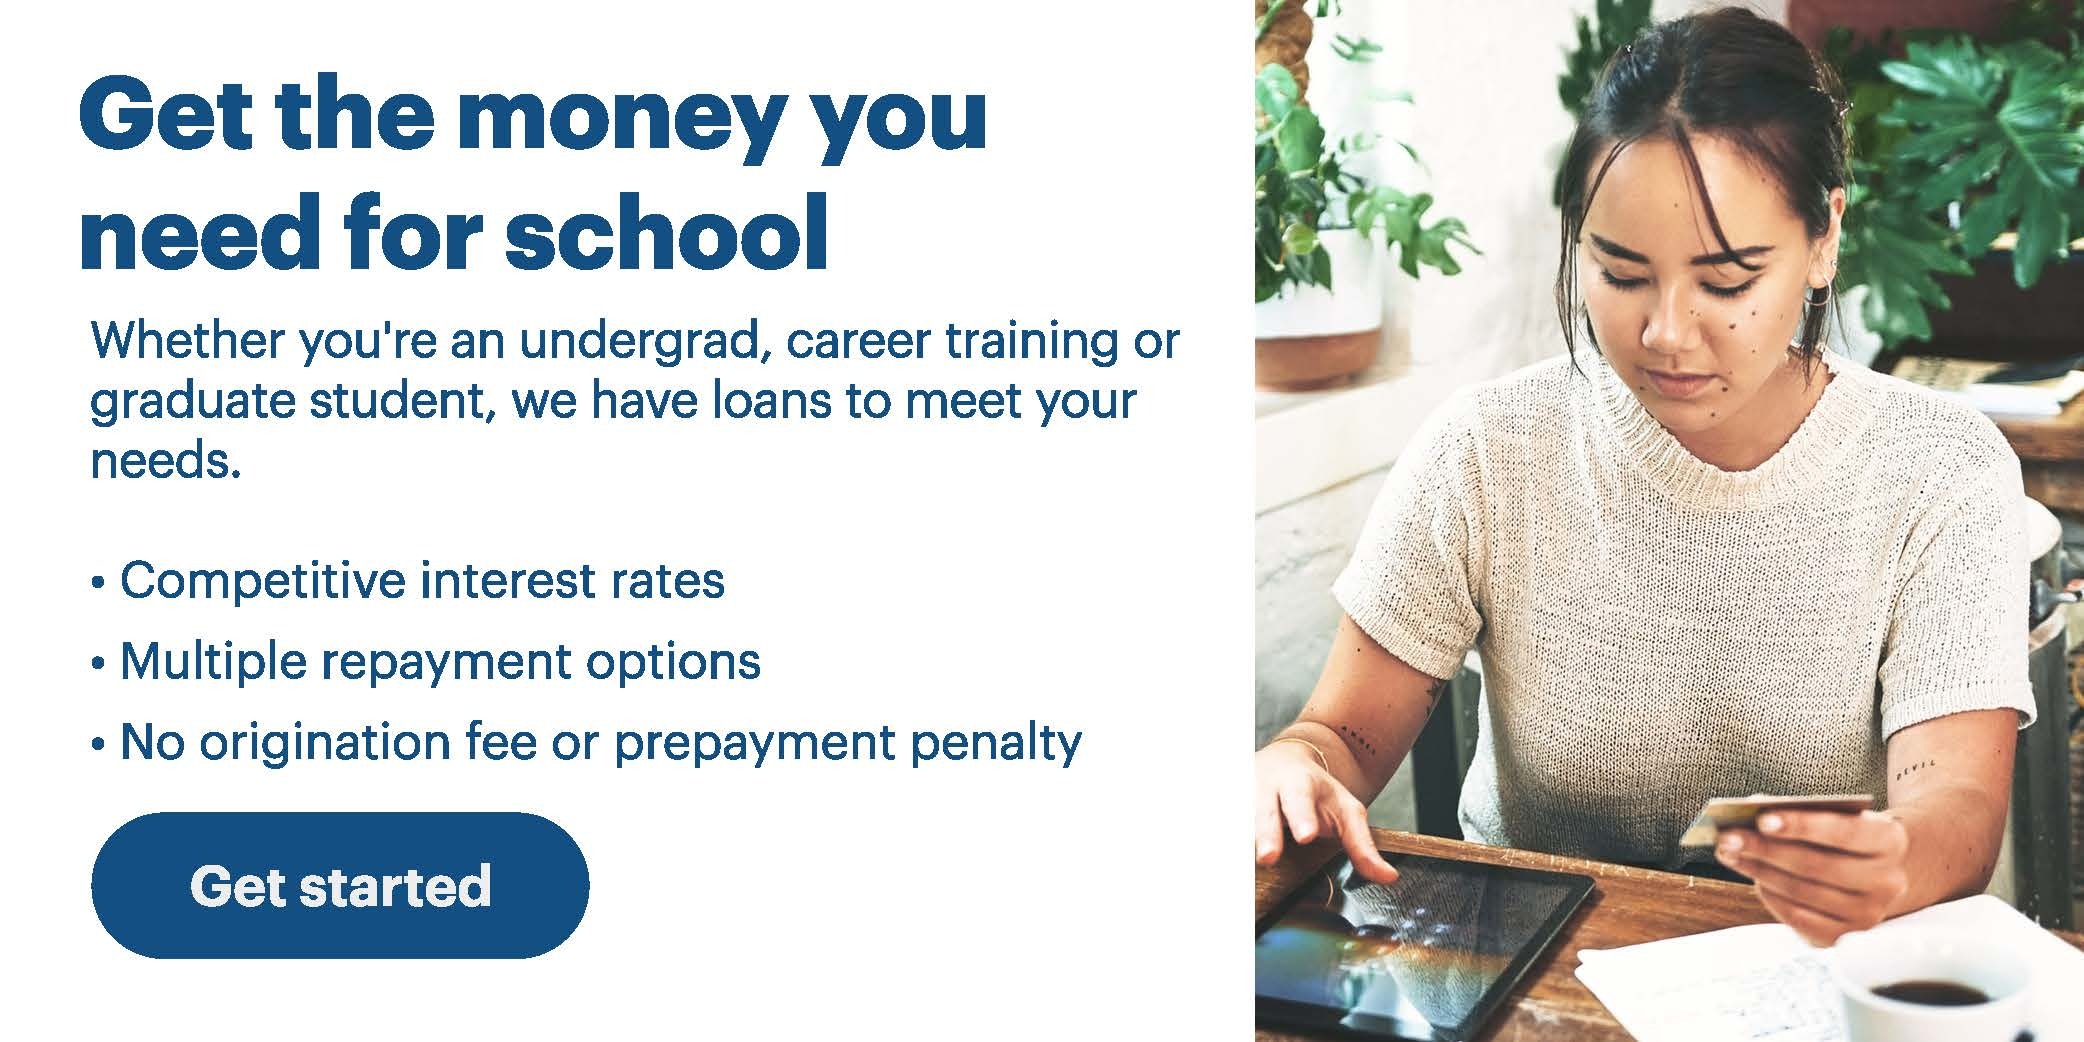 Alverno Private Student Loans by SallieMae for Alverno College Students in Milwaukee, WI